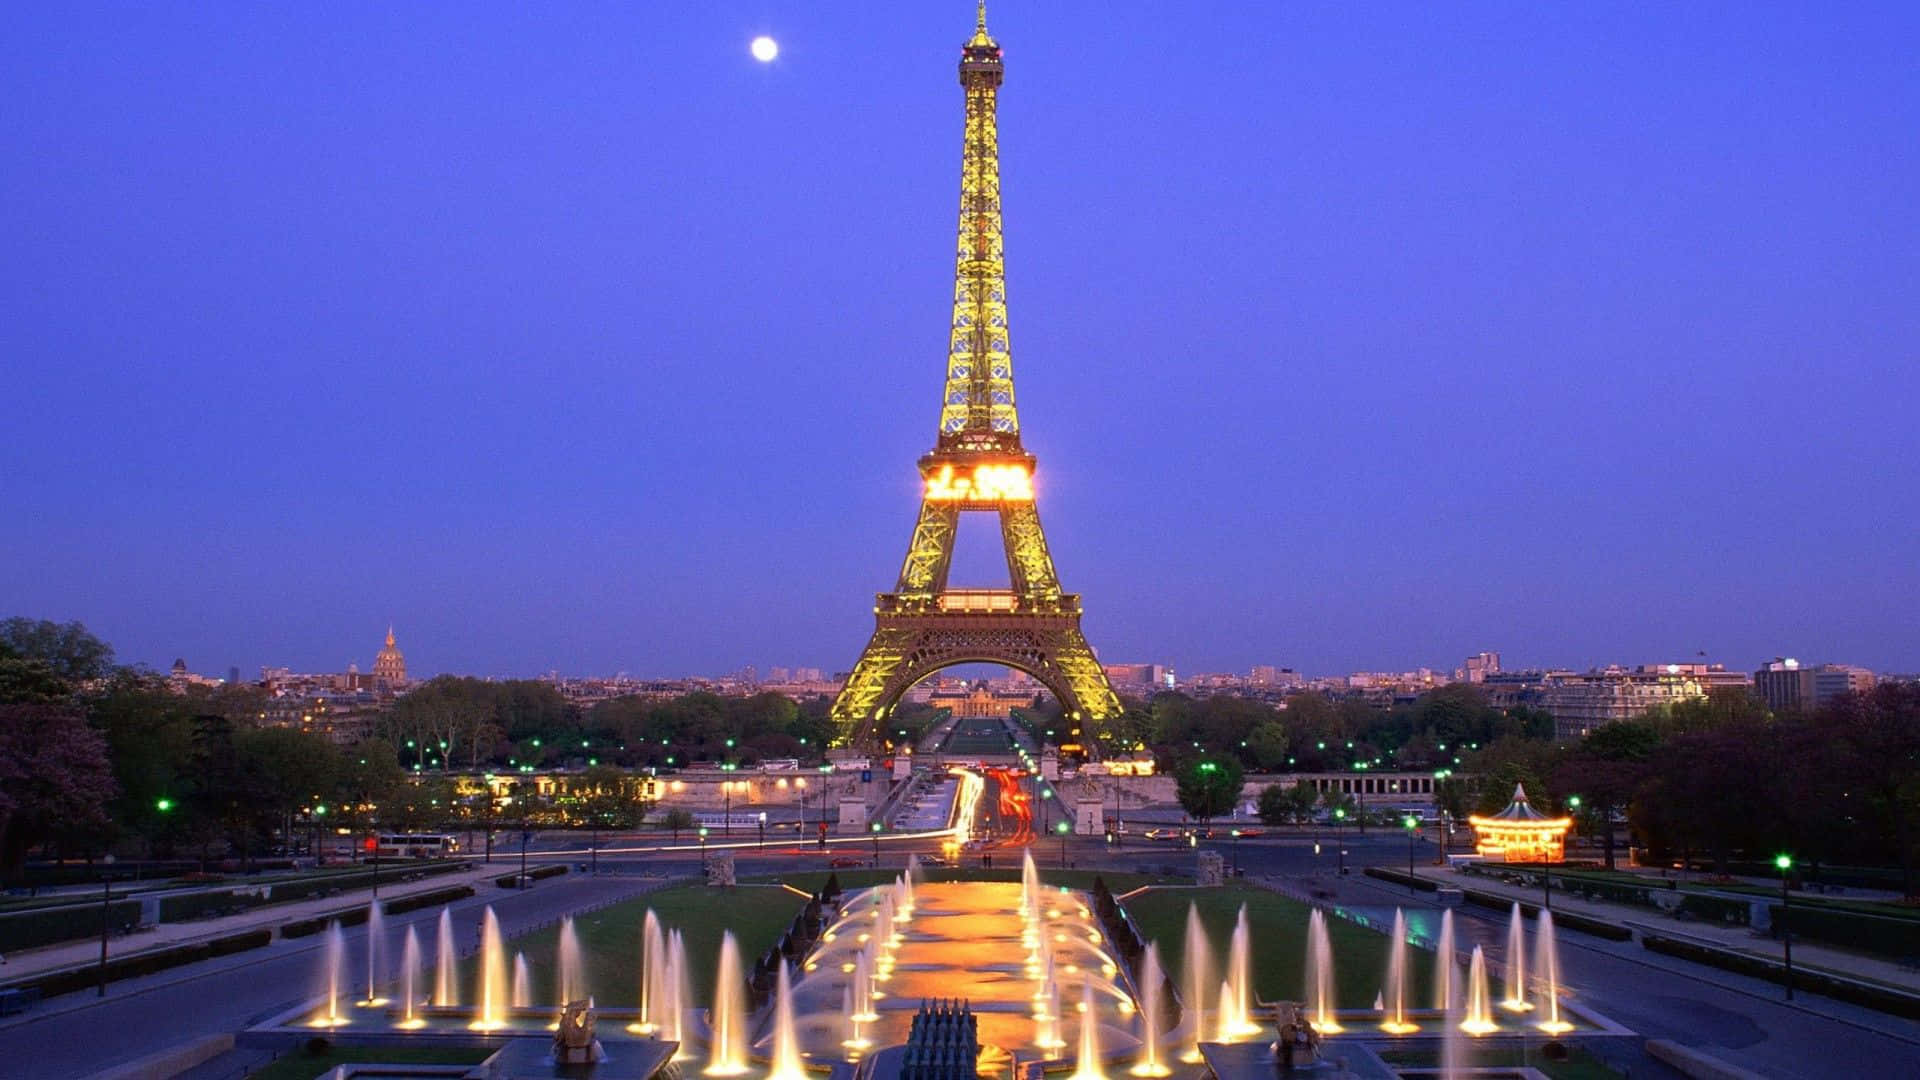 Enjoy the iconic city of lights right on your desktop. Wallpaper